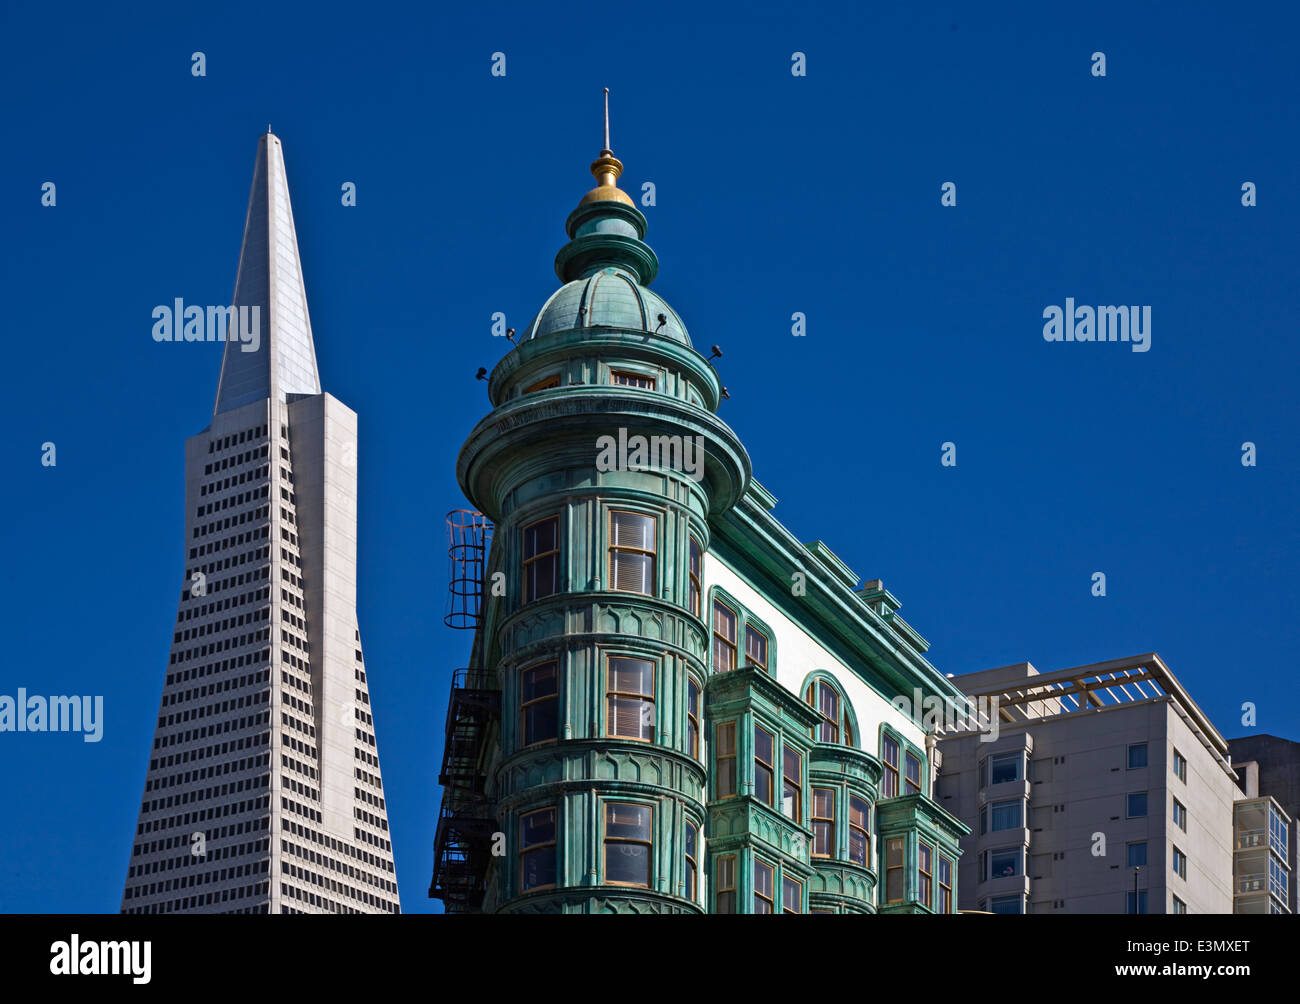 NORTH BEACH and the TRANSAMERICA BUILDING which was designed by architect William Pereira - SAN FRANCISCO, CALIFORNIA Stock Photo